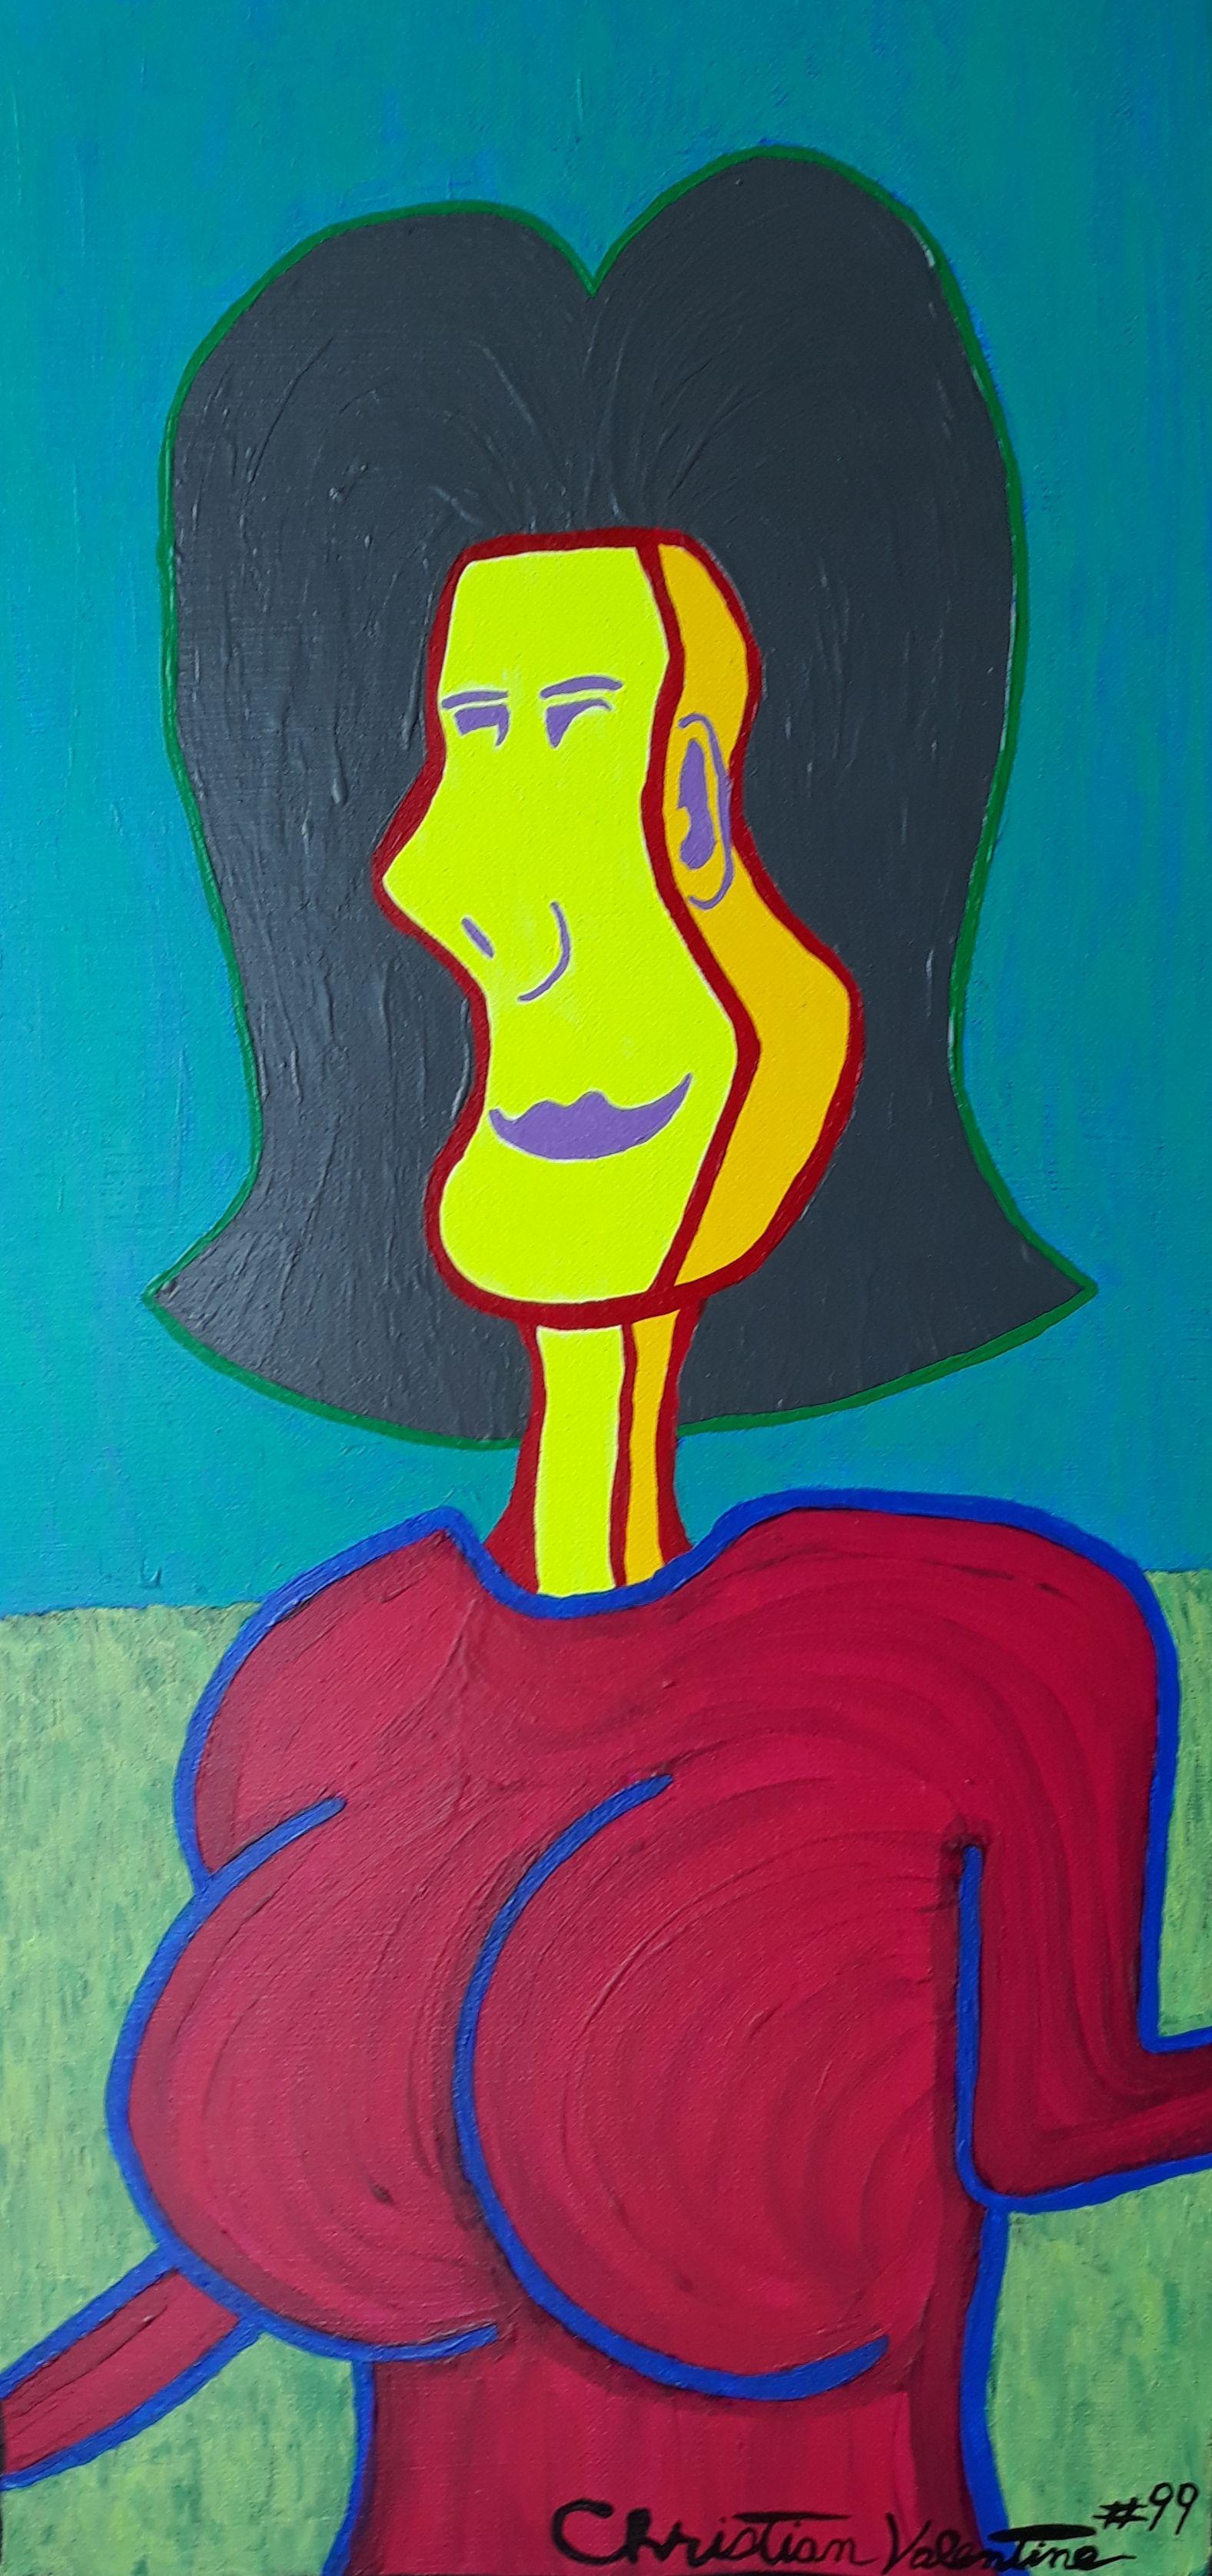 Christian Valentine Abstract Painting - Lady in the park, Painting, Acrylic on Canvas